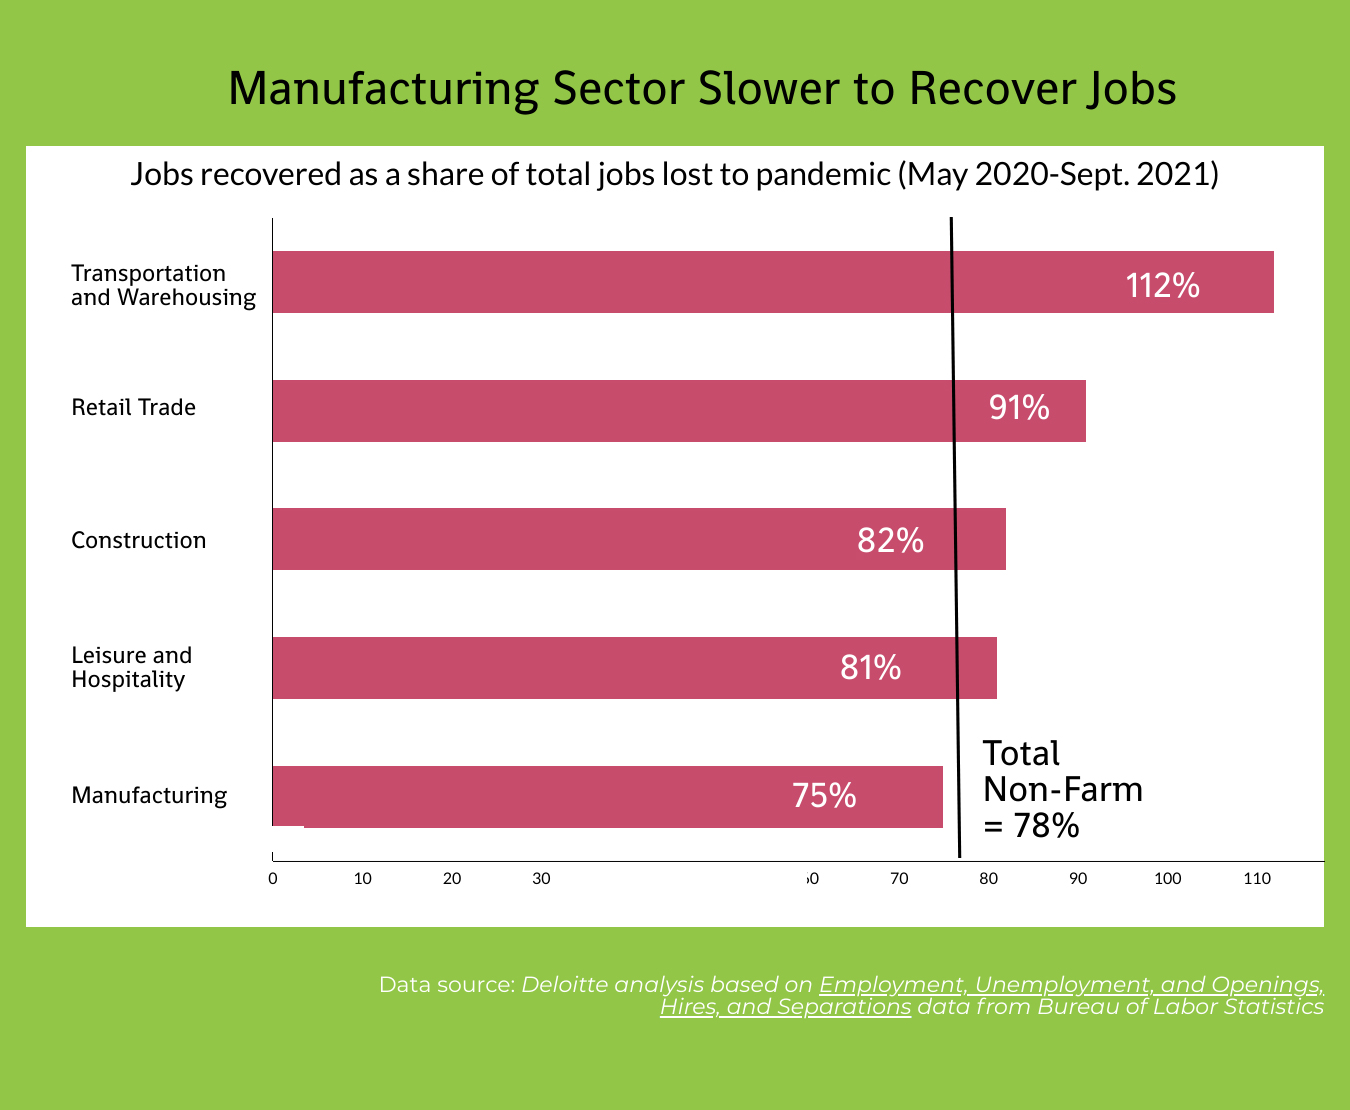 manufacturing workforce recruiting strategies are needed to overcome the fact that the manufacturing sector has been slower to fill jobs than other sectors. The chart shows the percent of jobs recovered as a share of total jobs lost to the pandemic (May 2020-Sept. 2021) and Transportation and Warehousing is at 112%; Retail trade is at 91%; construction is at 82%; Leisure and hospitality is at 81%; manufacturing is at 75%, below the non-farm average of 78%